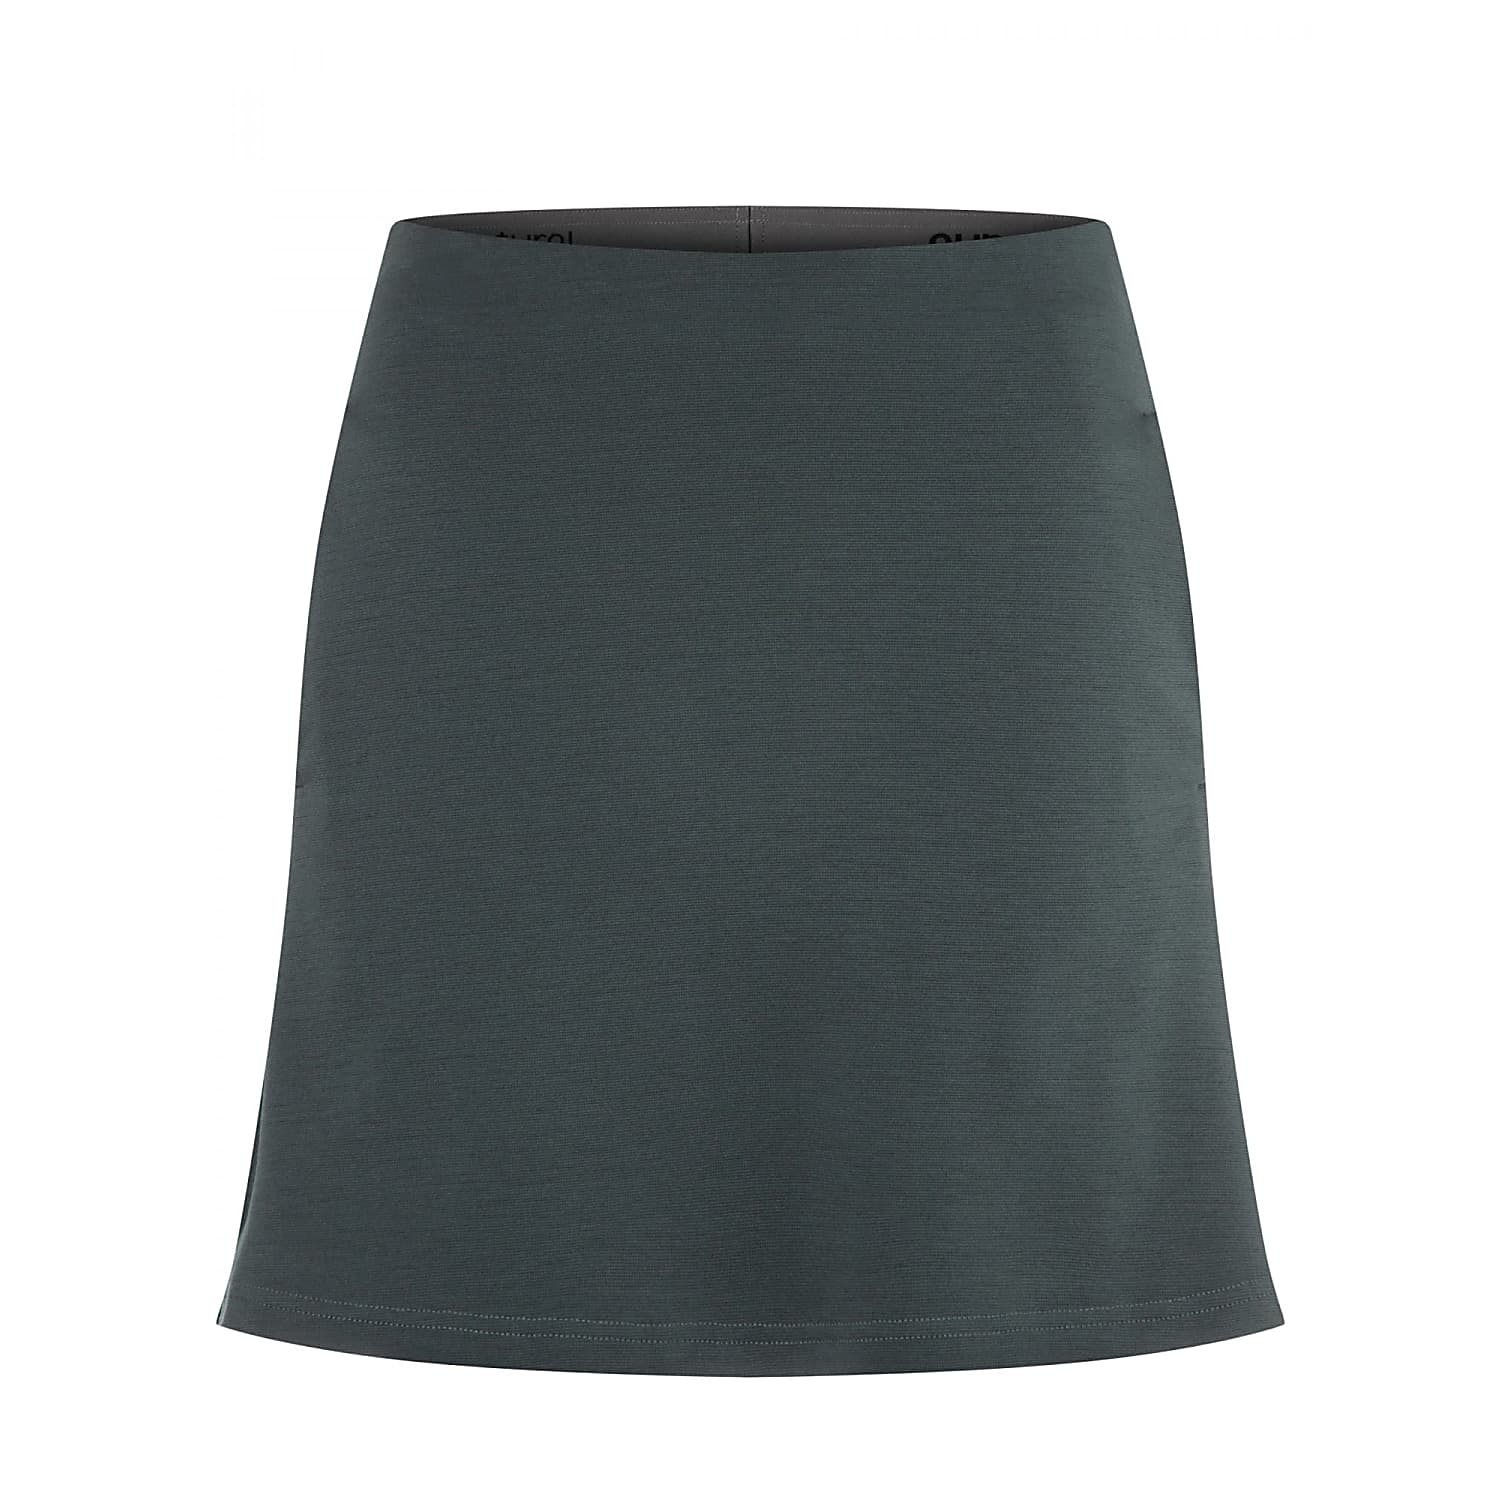 Fast SKORT, Super.Natural SPORTY W shipping Chic - and Urban cheap